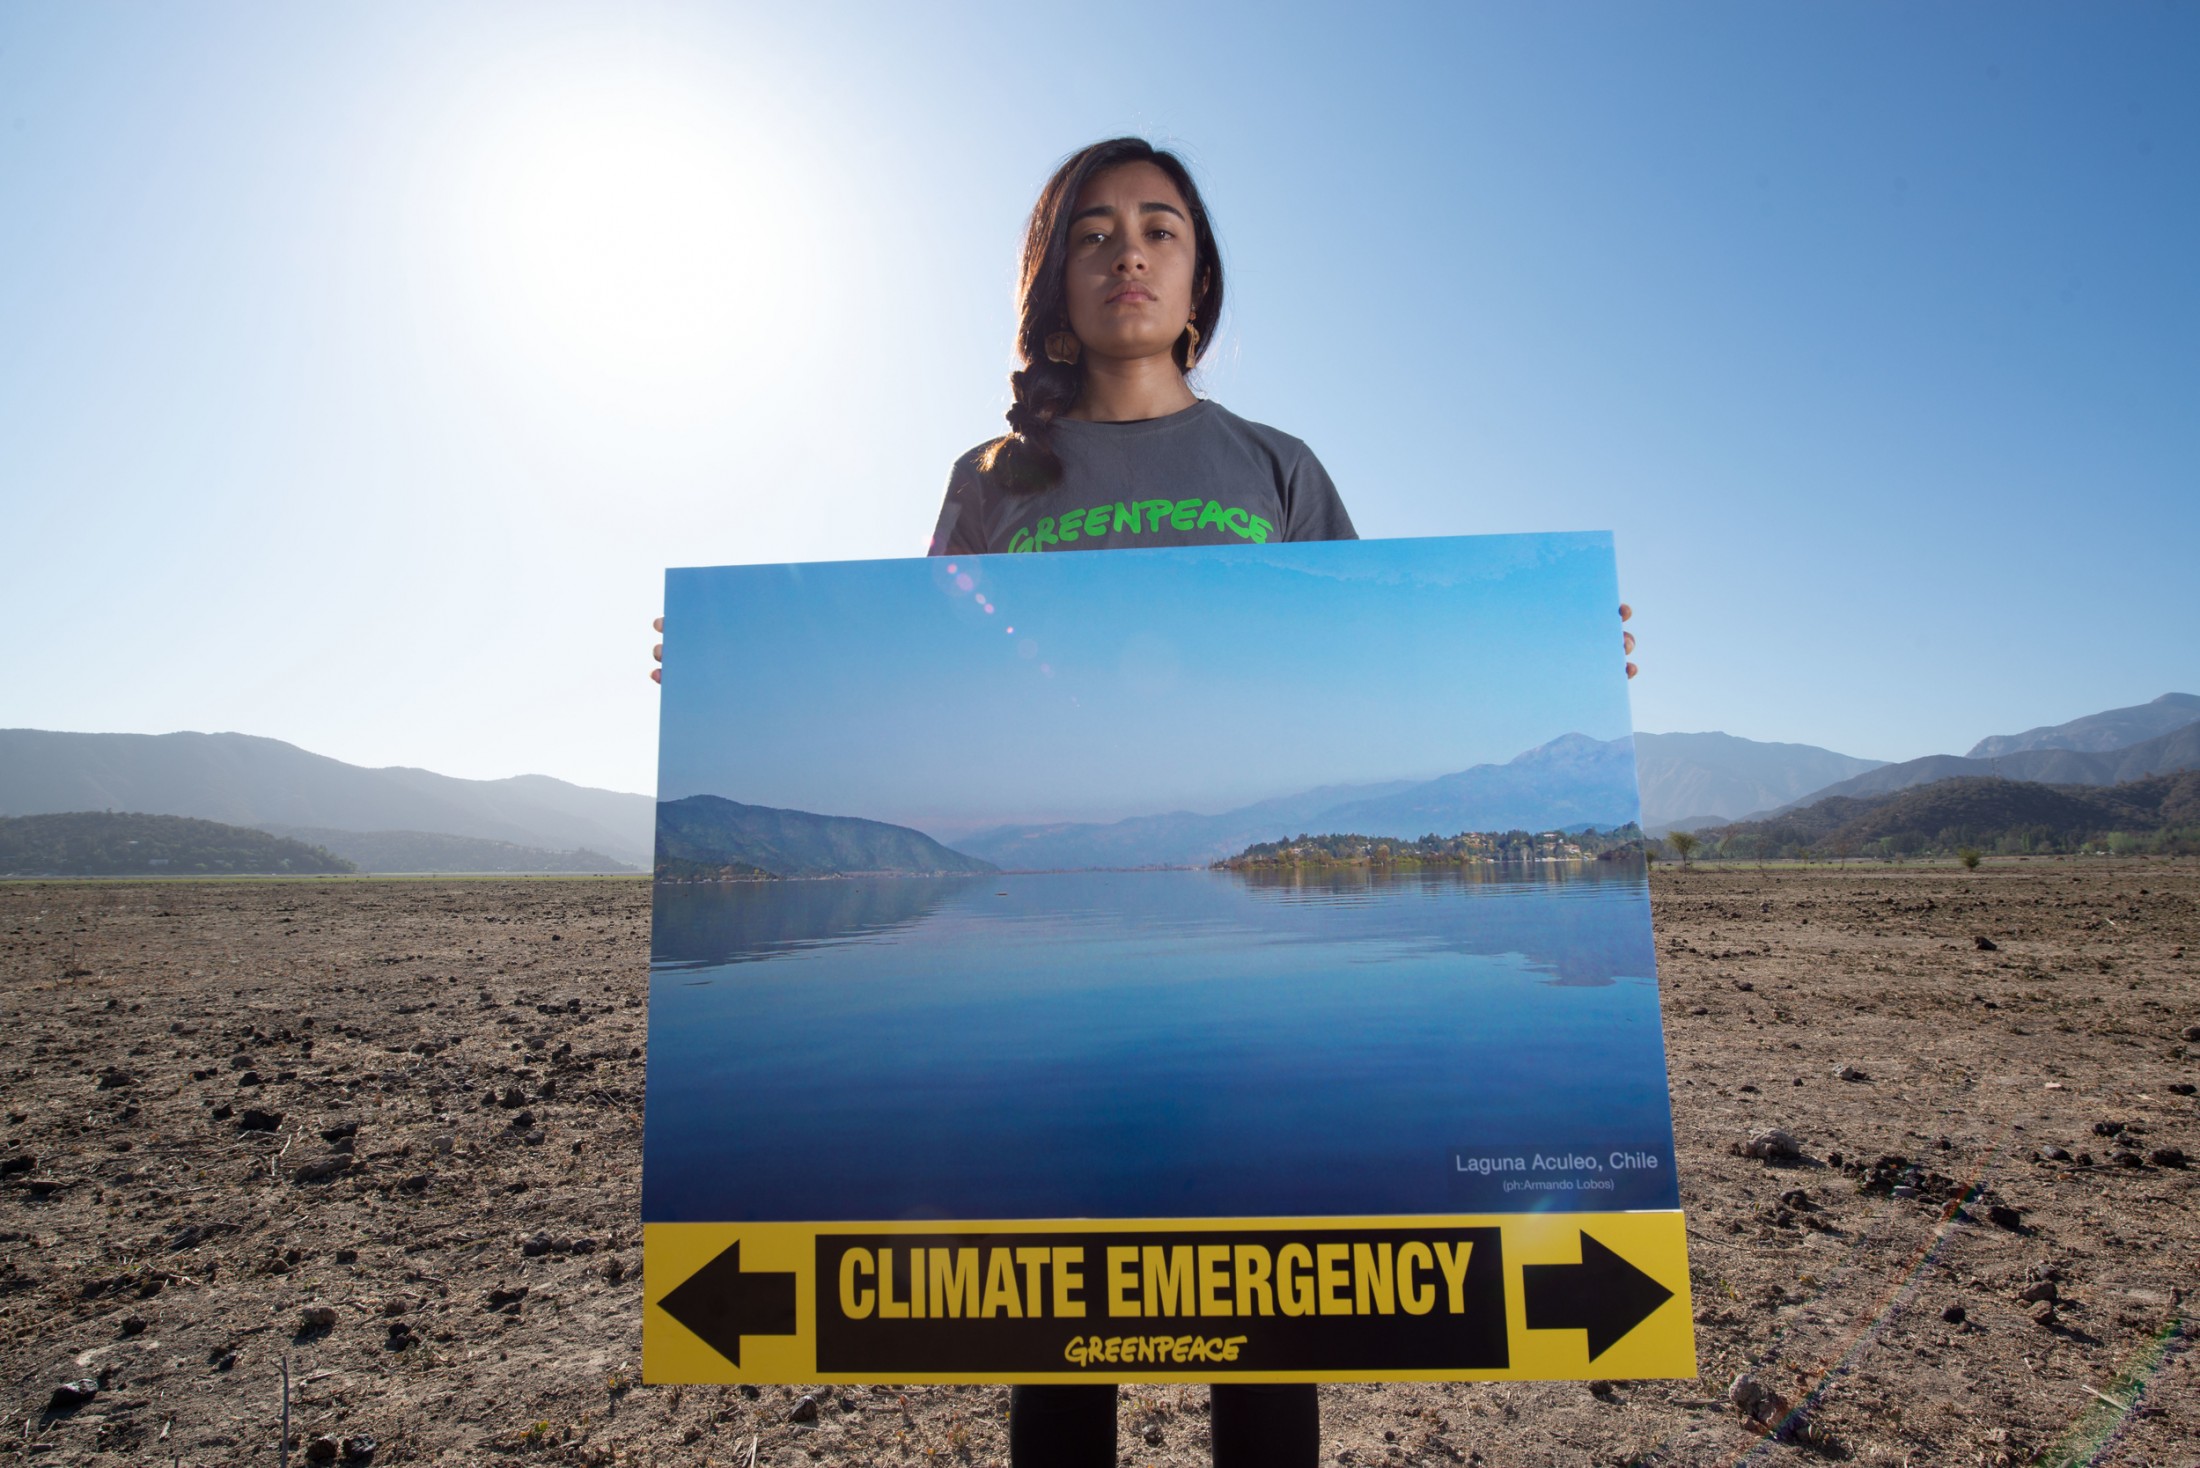 Climate Emergency Action at Laguna de Aculeo in Chile